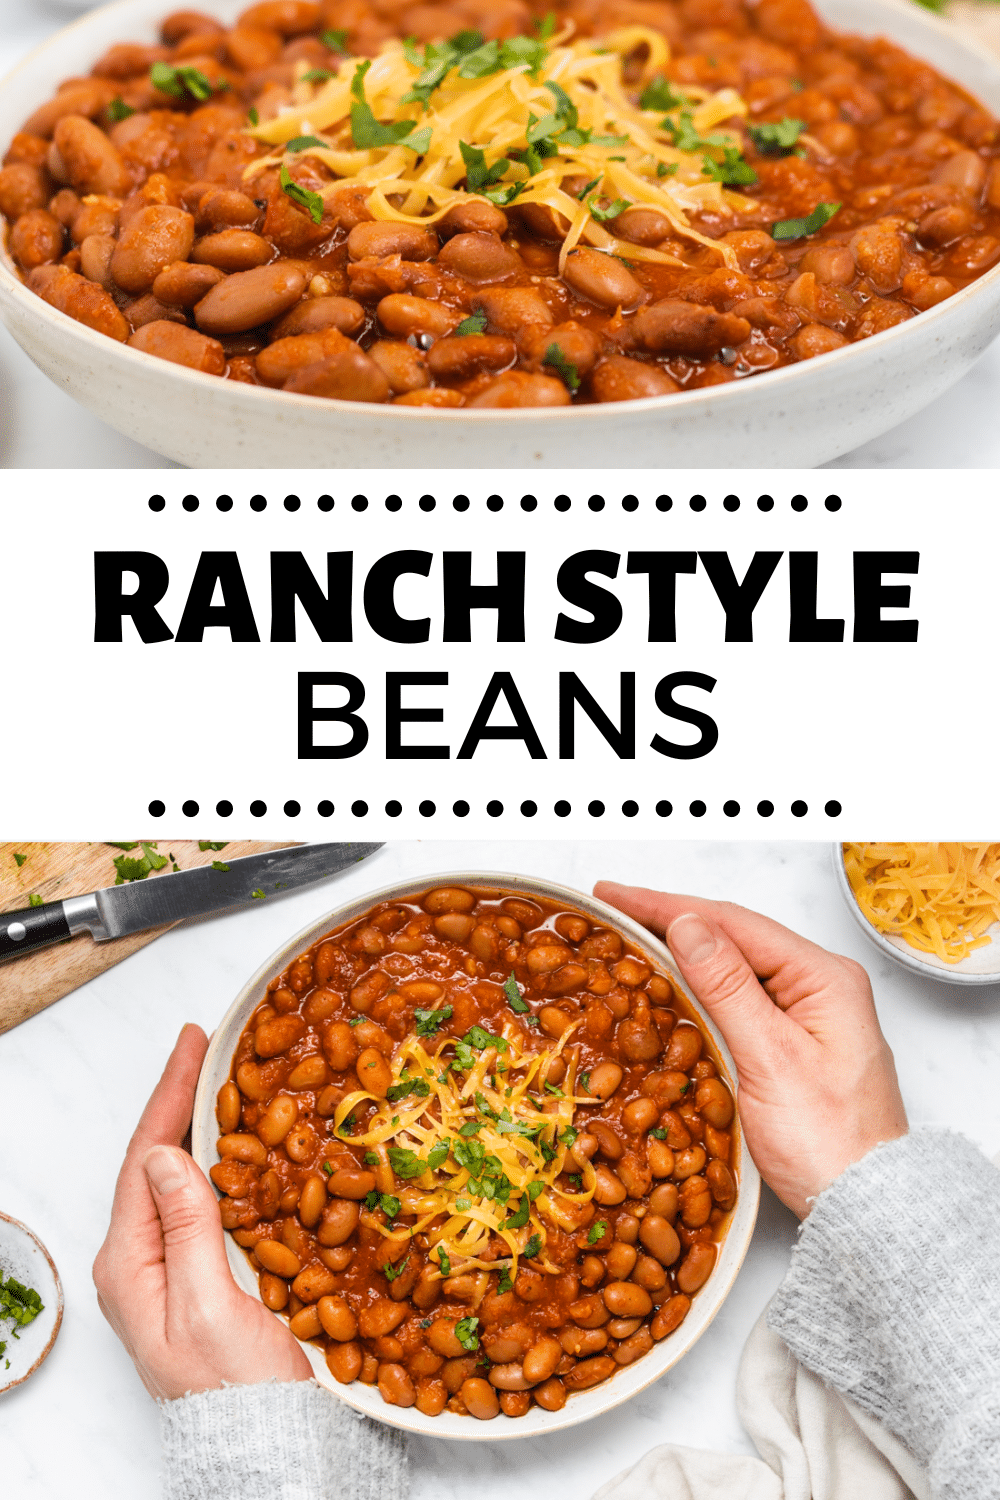 Perfectly cooked, tender Pinto Beans are simmered with zesty spices in a thick chili gravy to create this simple recipe for Ranch Style Beans that makes a delicious side dish or a hearty vegetarian main meal.